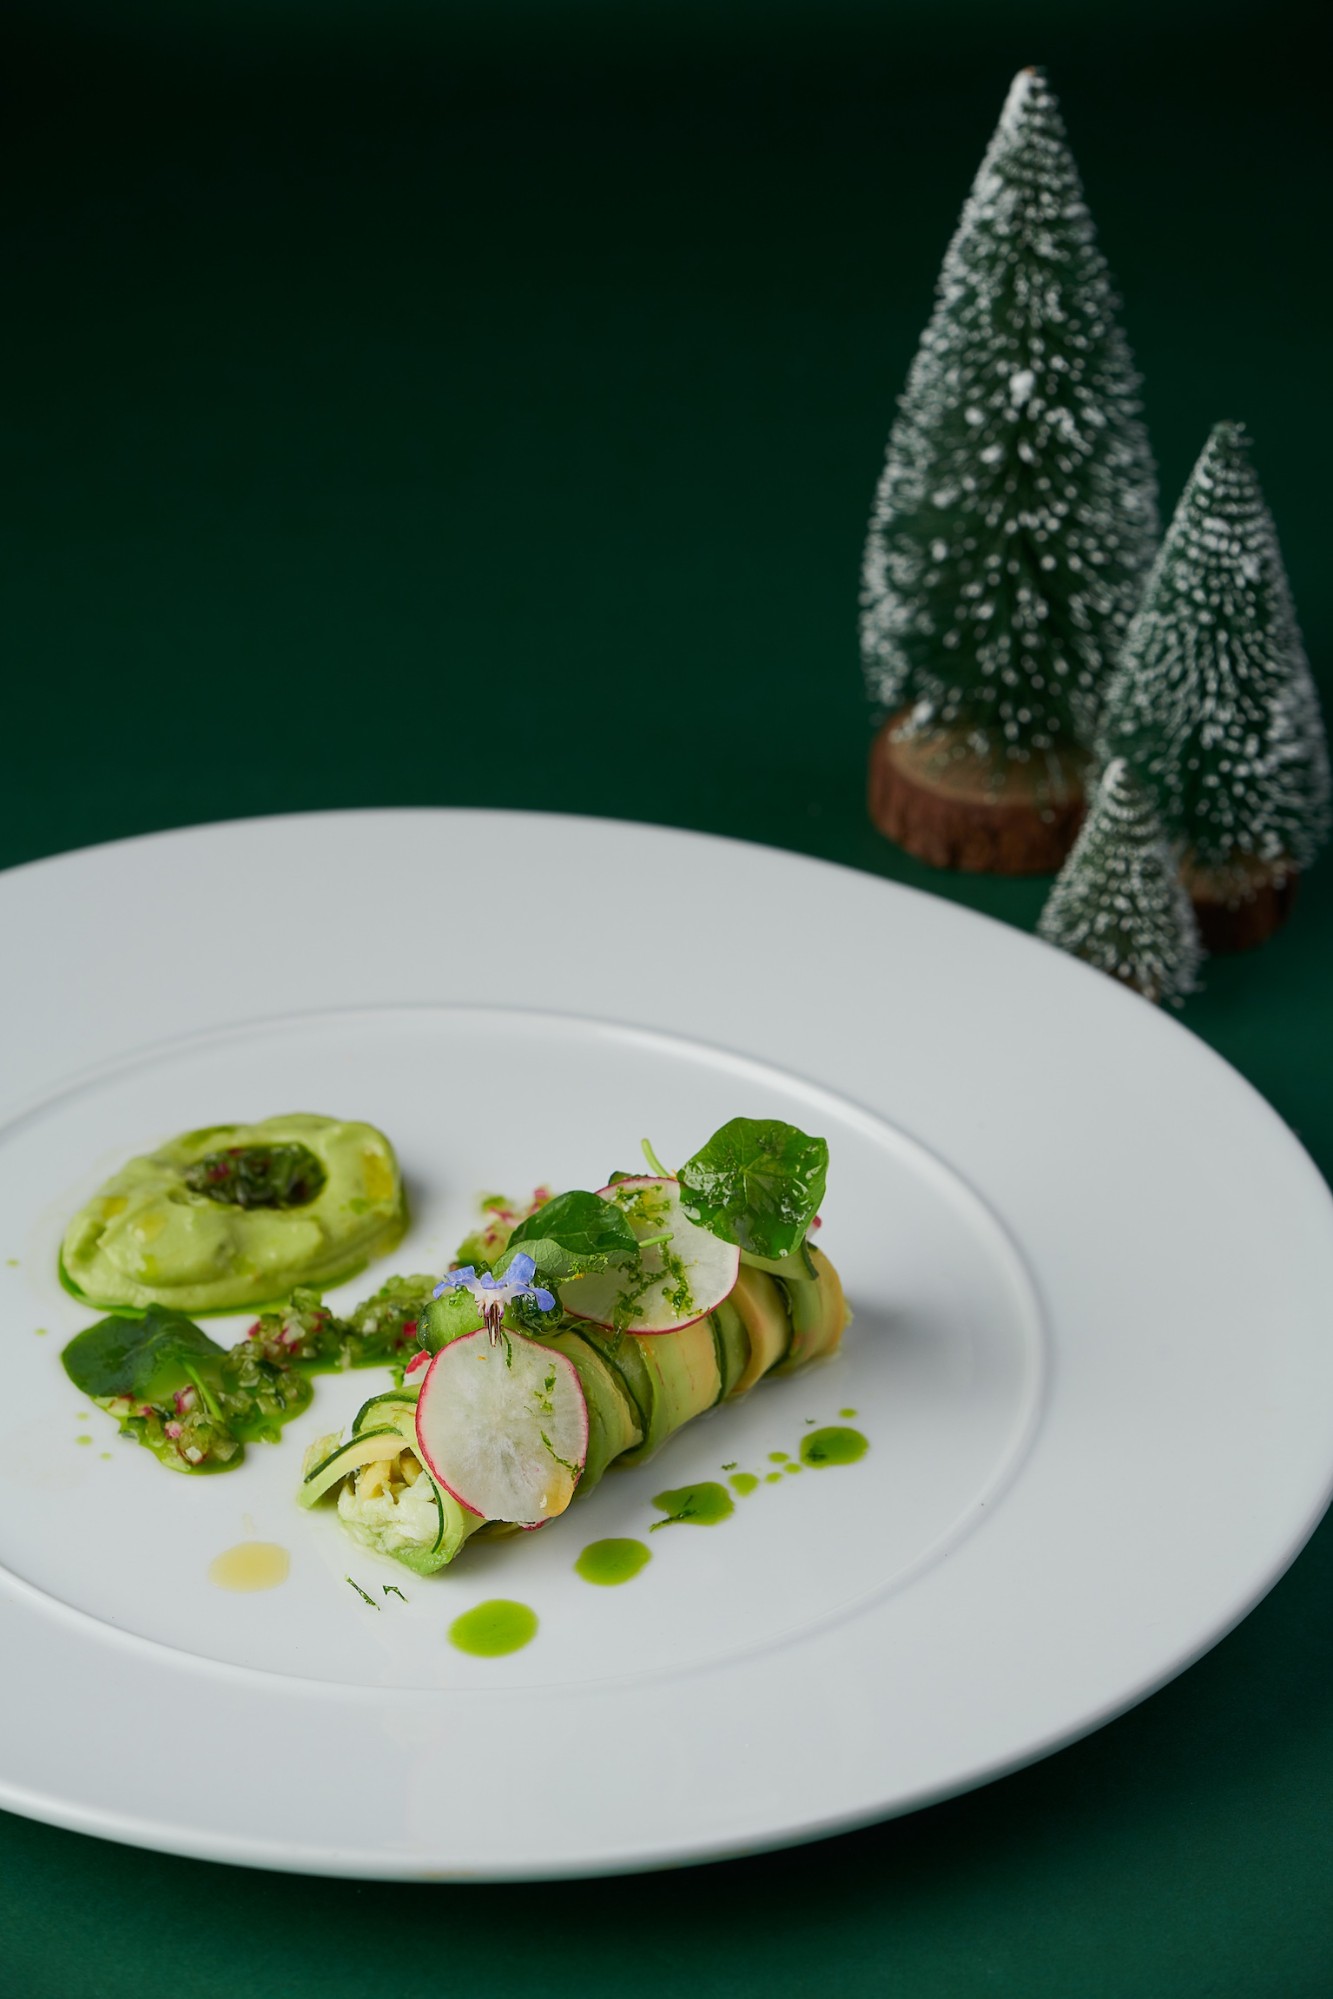 king-crab-lime-avocado-cannelloni-cucumber-and-radish-ginger-sauce_20211115_181435.jpg